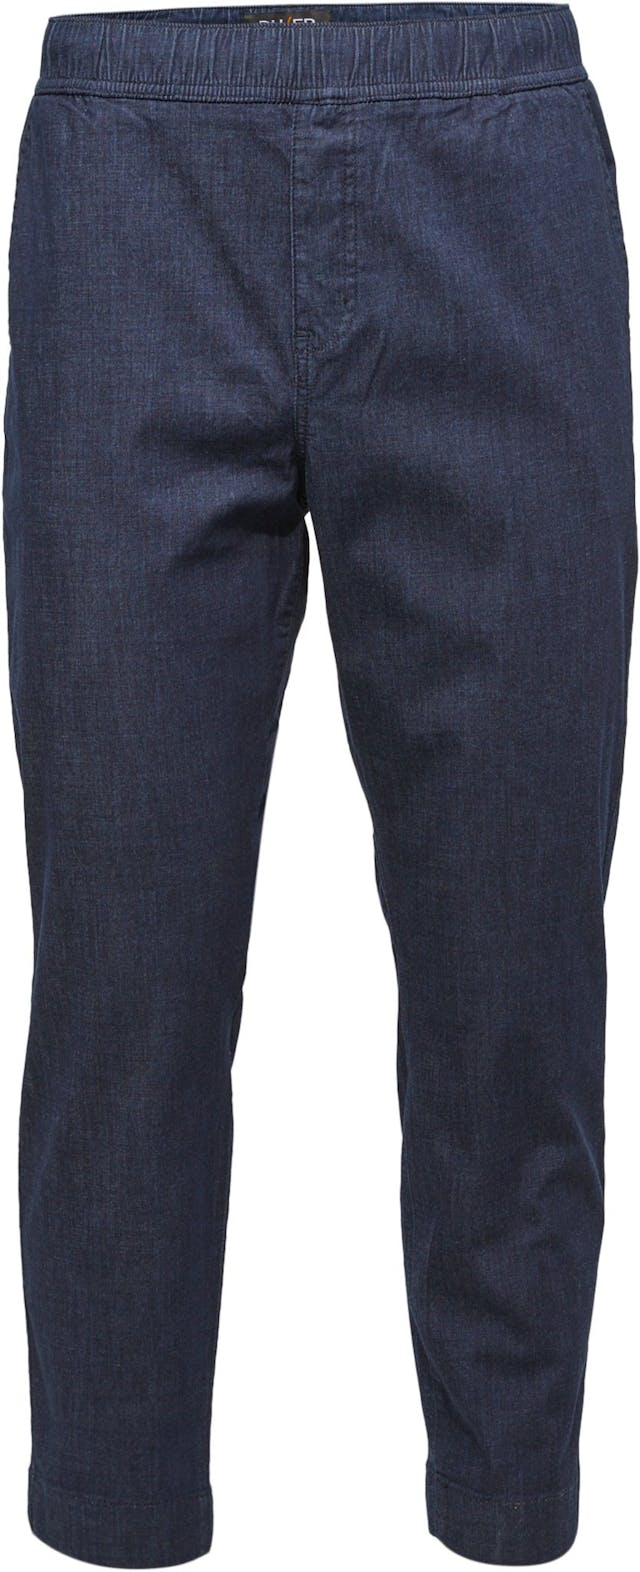 Product image for Weightless Denim Rove Pant - Men's